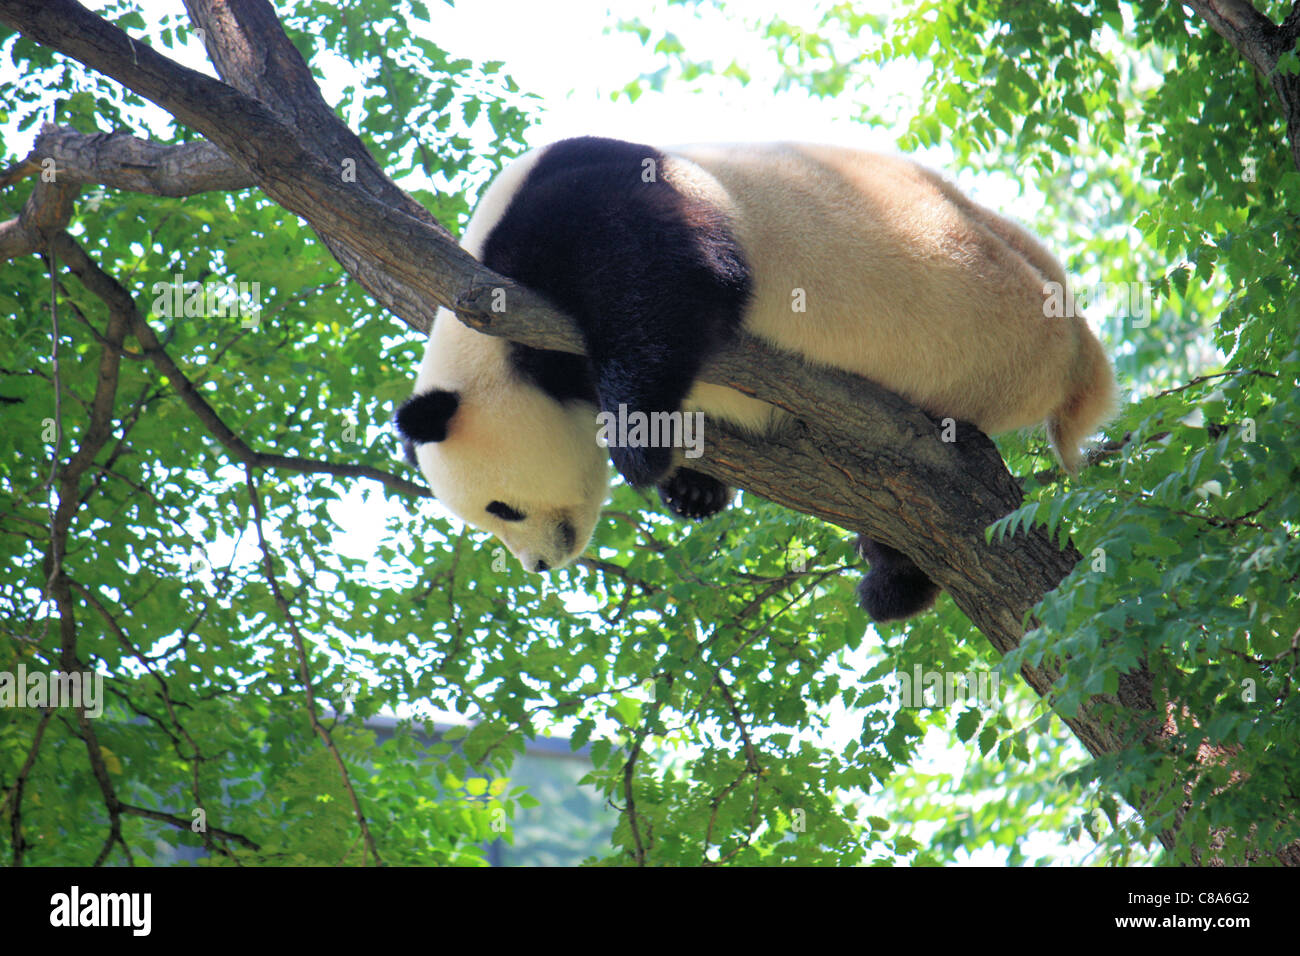 A giant panda perched in a tree, the Chinese symbol, Beijin zoo, China Stock Photo